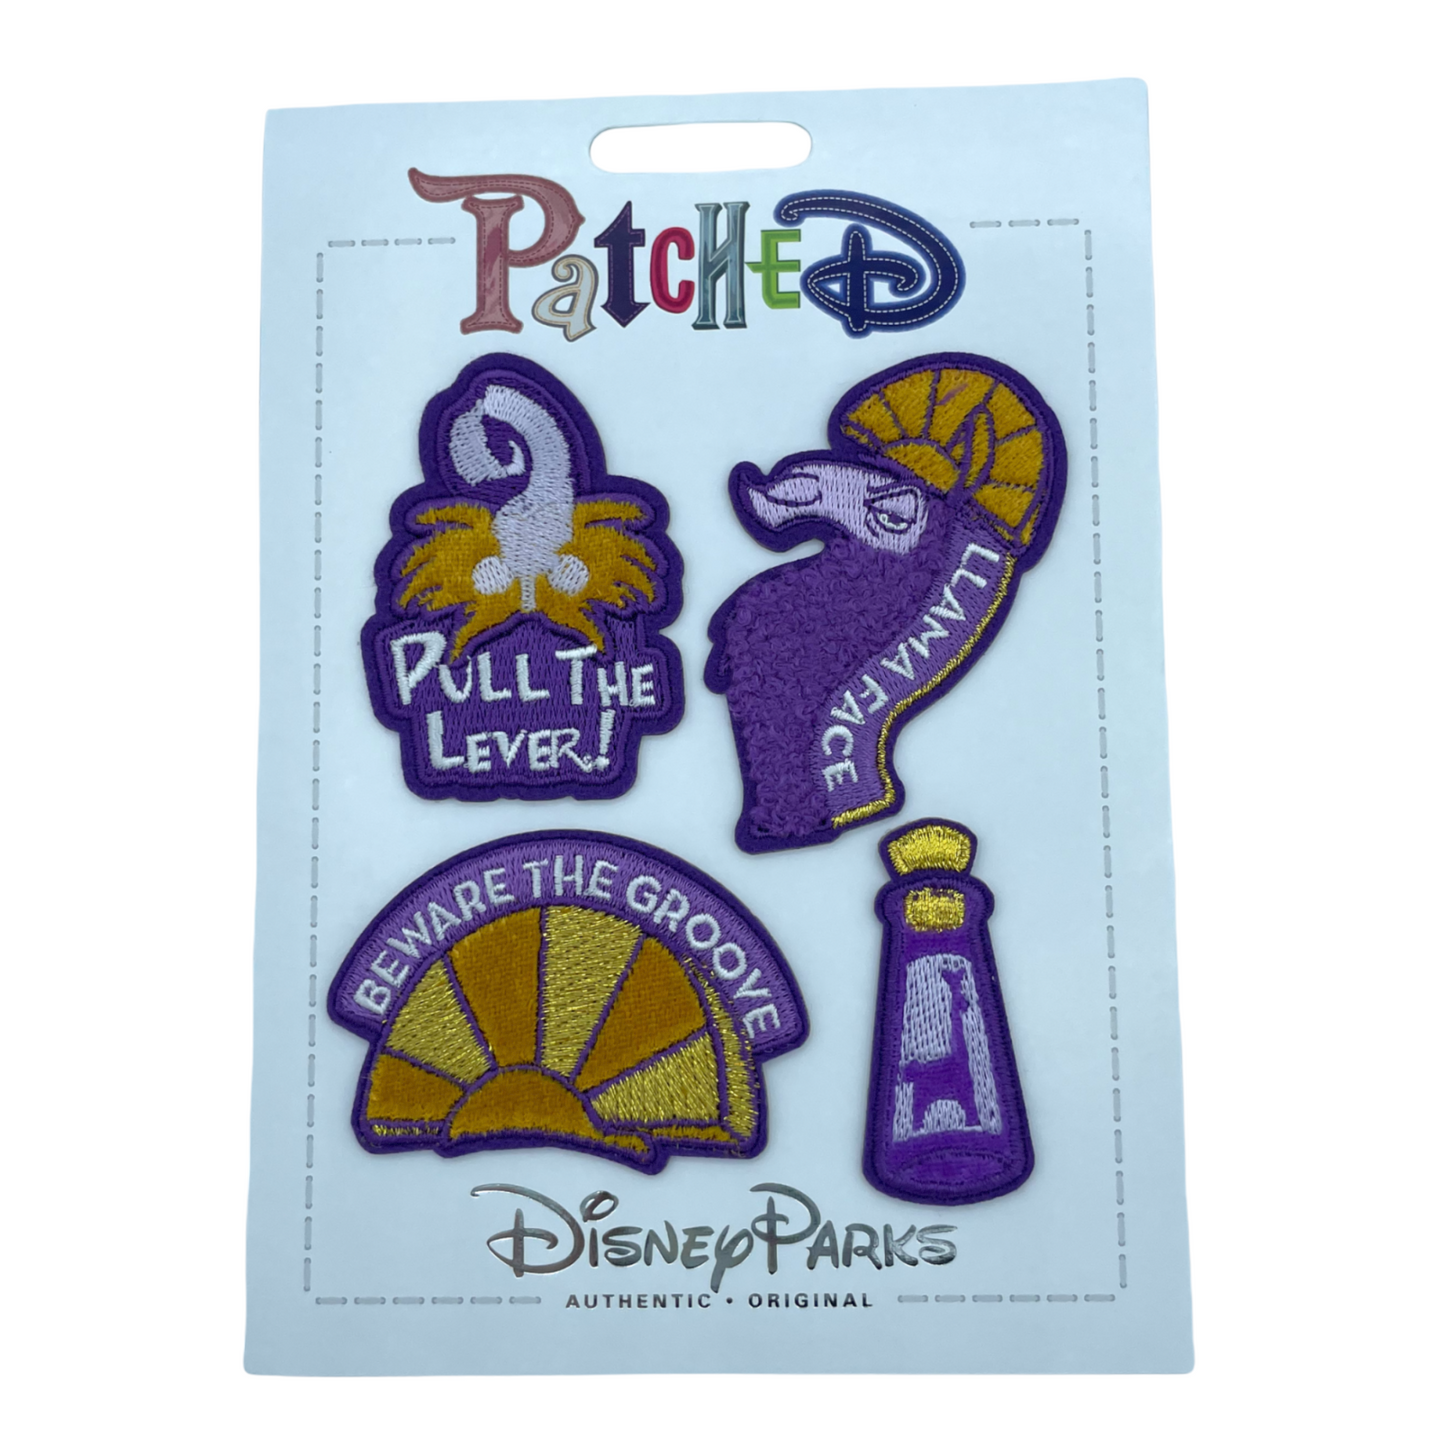 Emperor's New Groove Patch Set